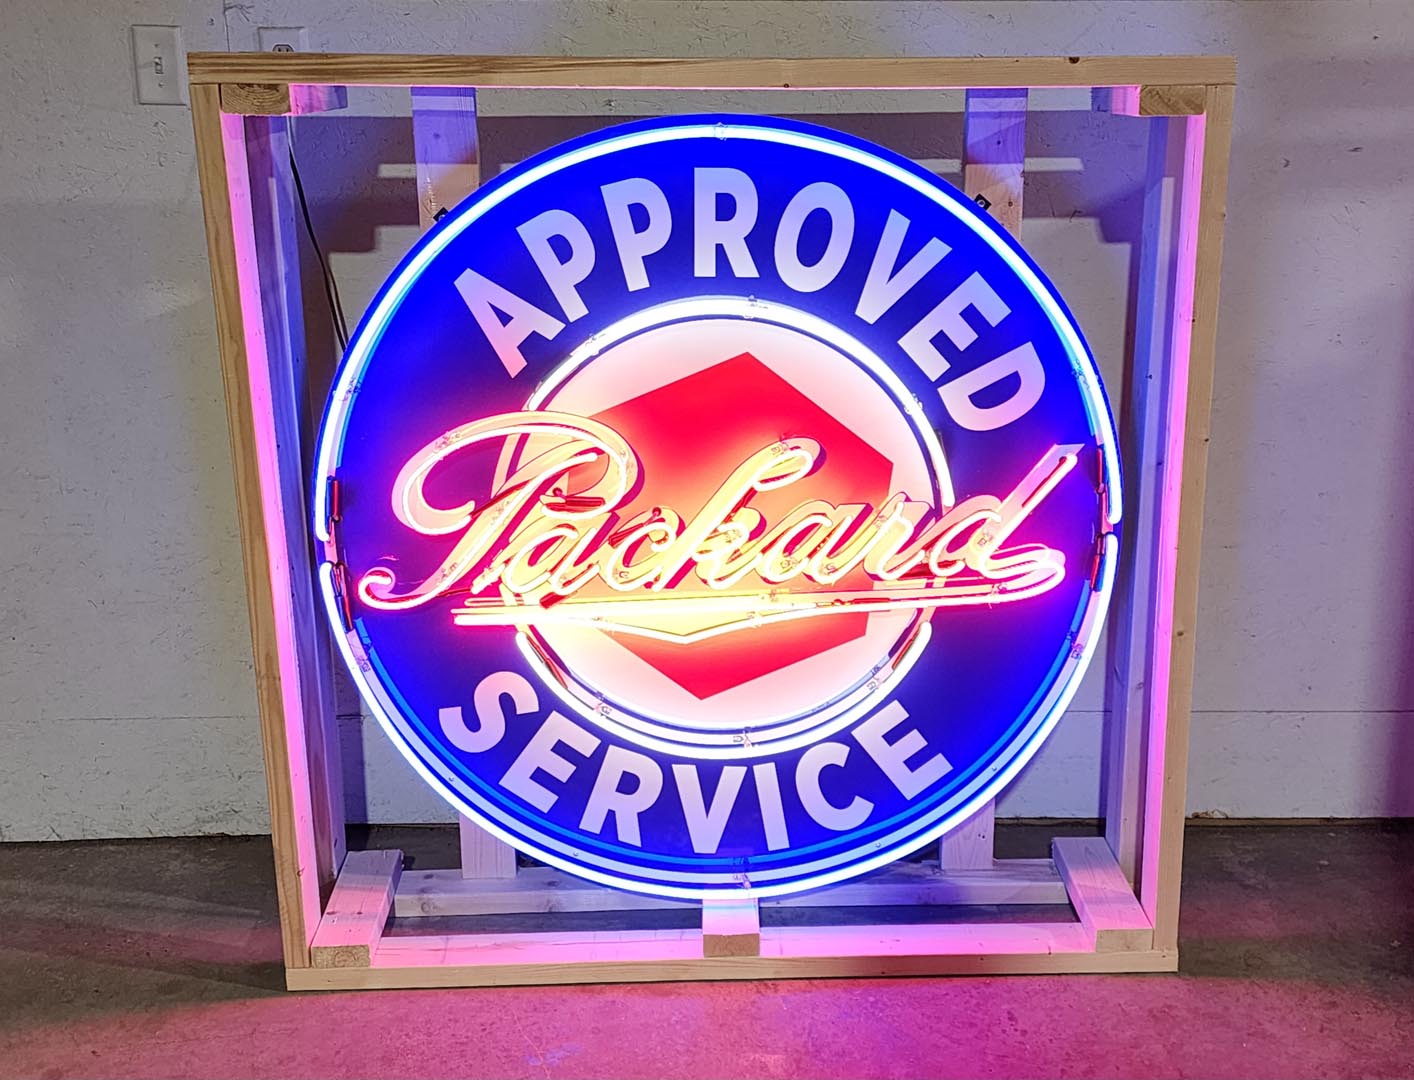 Custom Packard Approved Service Neon Lighted Sign